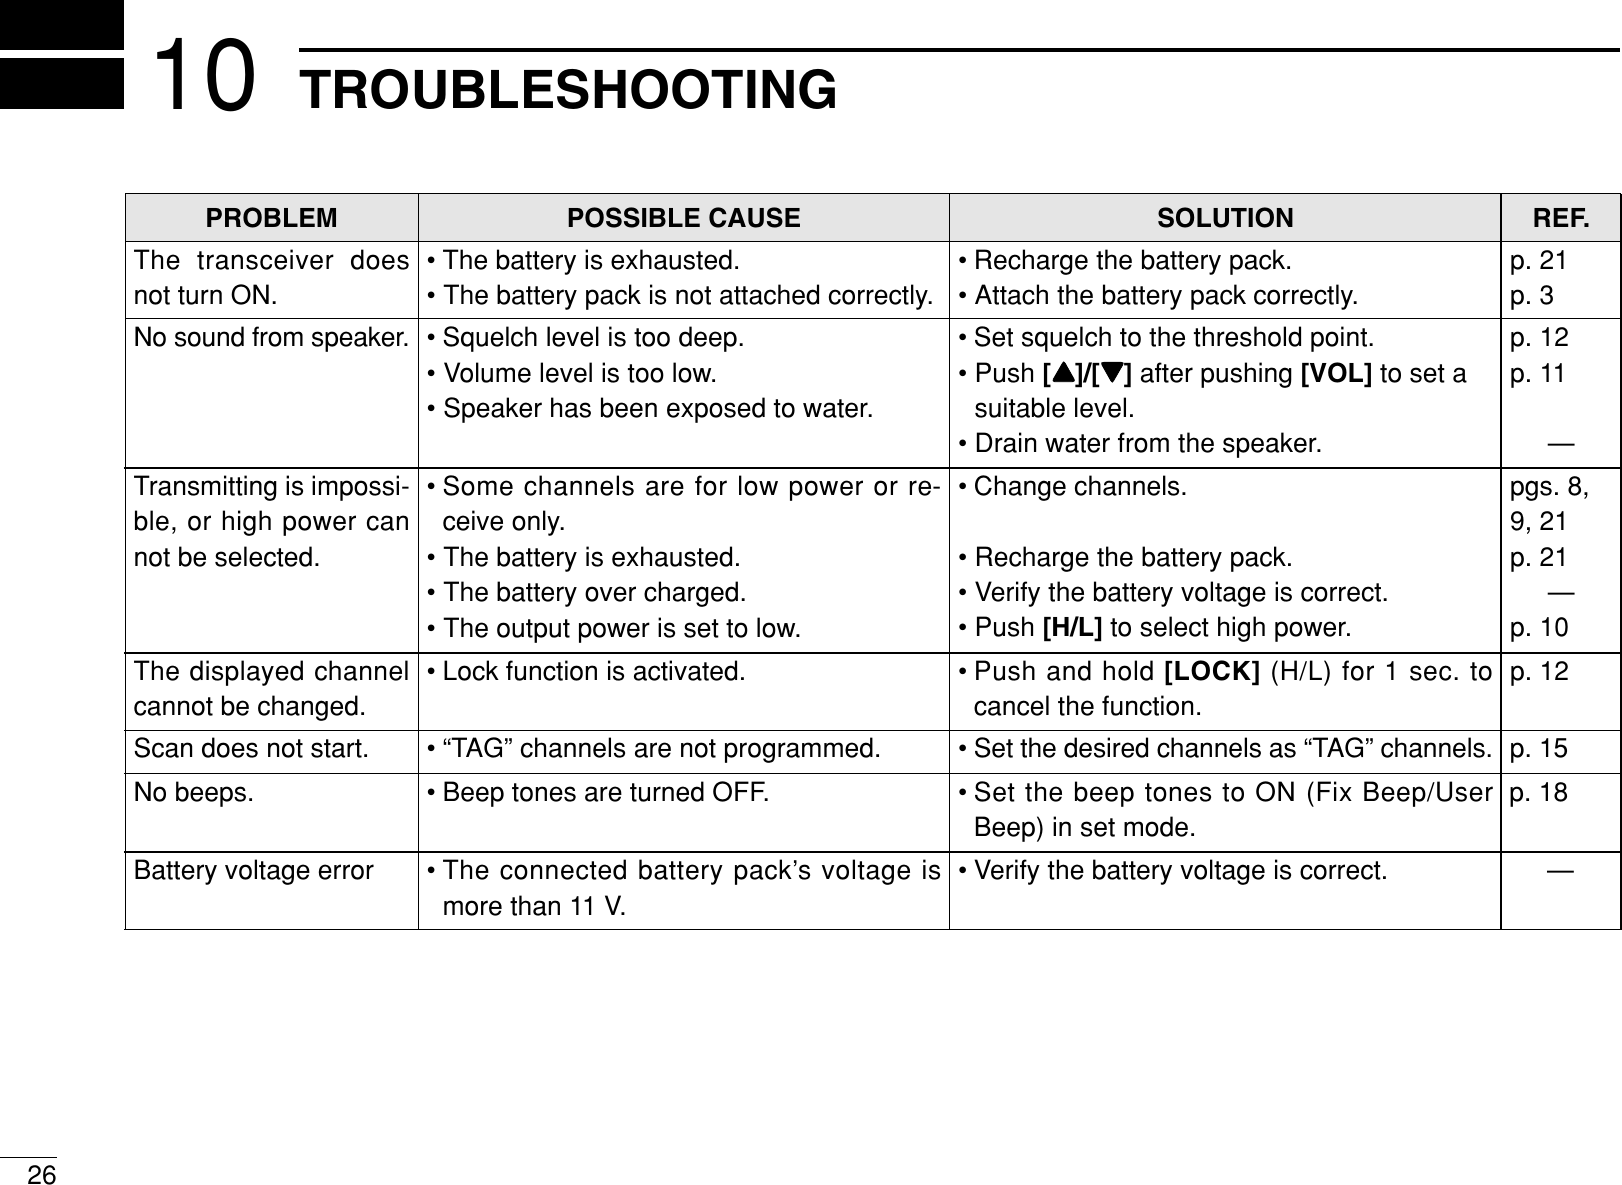 26TROUBLESHOOTING10PROBLEM POSSIBLE CAUSE SOLUTION REF.No sound from speaker. • Squelch level is too deep.• Volume level is too low.• Speaker has been exposed to water.p. 12p. 11—• Set squelch to the threshold point.• Push [Y]/[Z]after pushing [VOL] to set asuitable level.• Drain water from the speaker.The transceiver doesnot turn ON.• The battery is exhausted.• The battery pack is not attached correctly.p. 21p. 3• Recharge the battery pack.• Attach the battery pack correctly.Transmitting is impossi-ble, or high power cannot be selected.• Some channels are for low power or re-ceive only.• The battery is exhausted.• The battery over charged.• The output power is set to low.pgs. 8,9, 21p. 21—p. 10• Change channels.• Recharge the battery pack.• Verify the battery voltage is correct.• Push [H/L] to select high power.The displayed channelcannot be changed.• Lock function is activated. • Push and hold [LOCK] (H/L) for 1 sec. tocancel the function.p. 12Scan does not start. • “TAG” channels are not programmed. • Set the desired channels as “TAG” channels. p. 15No beeps. • Beep tones are turned OFF. • Set the beep tones to ON (Fix Beep/UserBeep) in set mode.p. 18Battery voltage error • The connected battery pack’s voltage ismore than 11 V.• Verify the battery voltage is correct. —